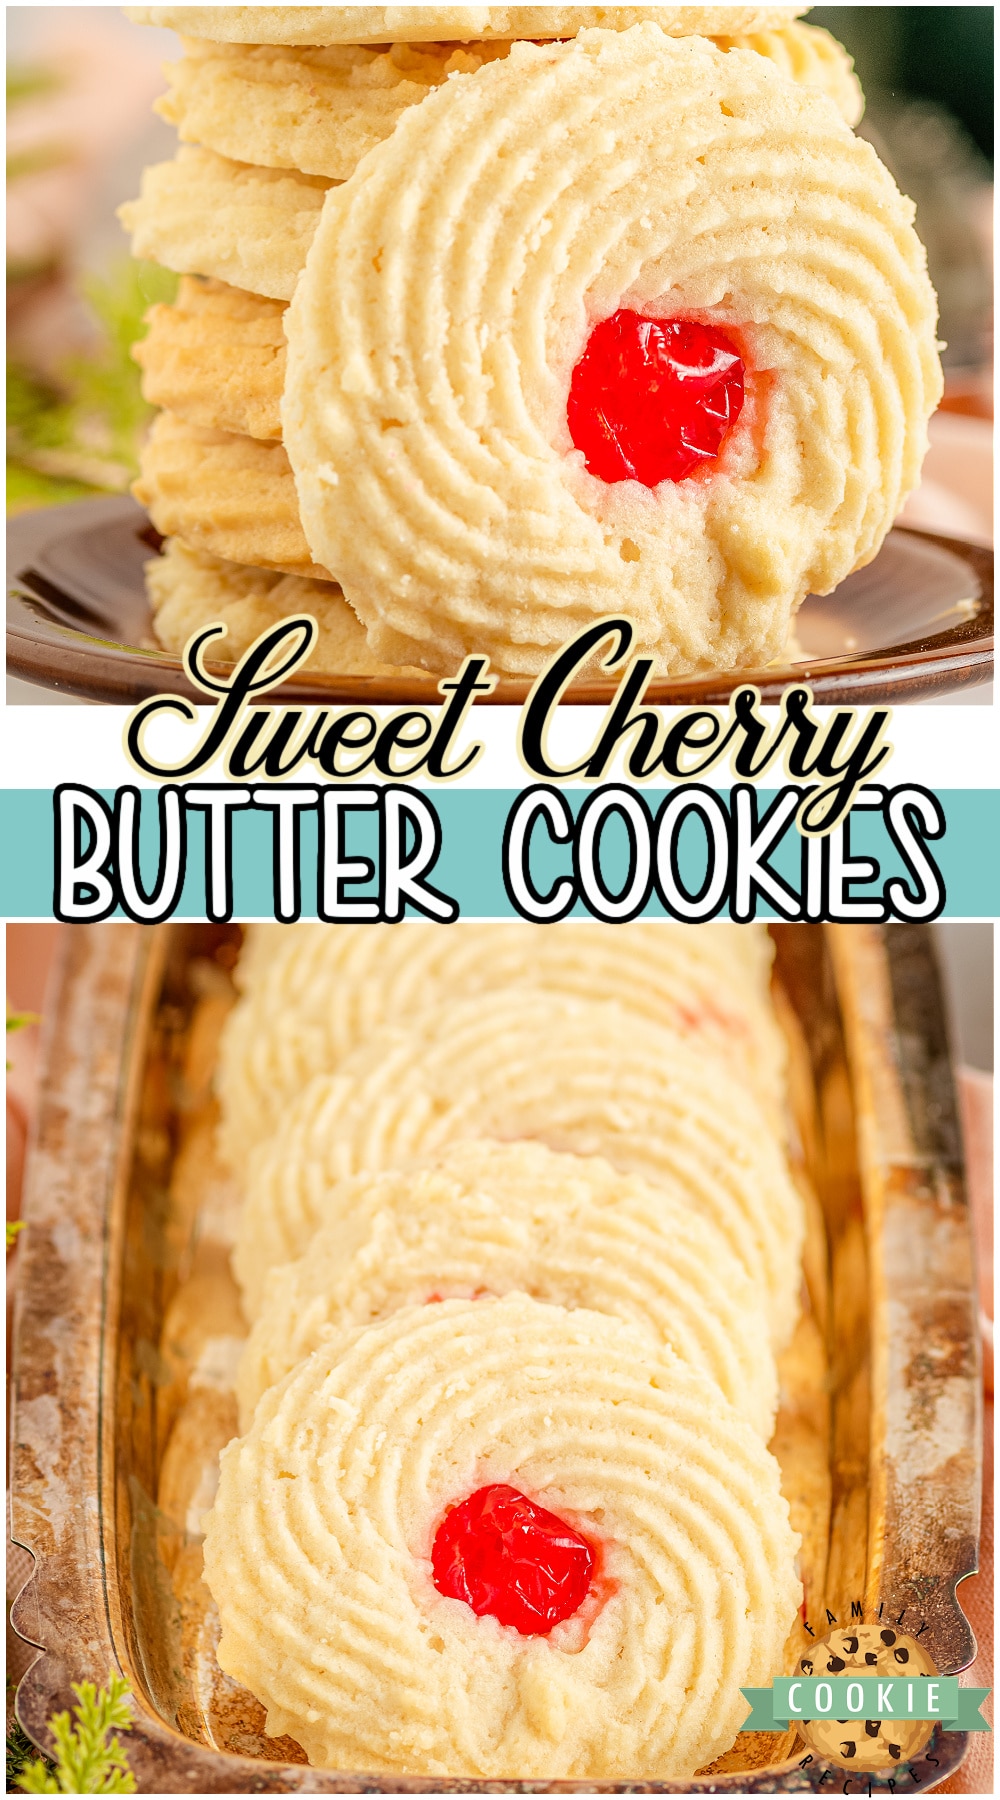 Cherry Butter Cookies made with classic ingredients & adorned with a simple cherry! Buttery crisp shortbread cookies topped with sweet cherries for a festive & delicious treat. 